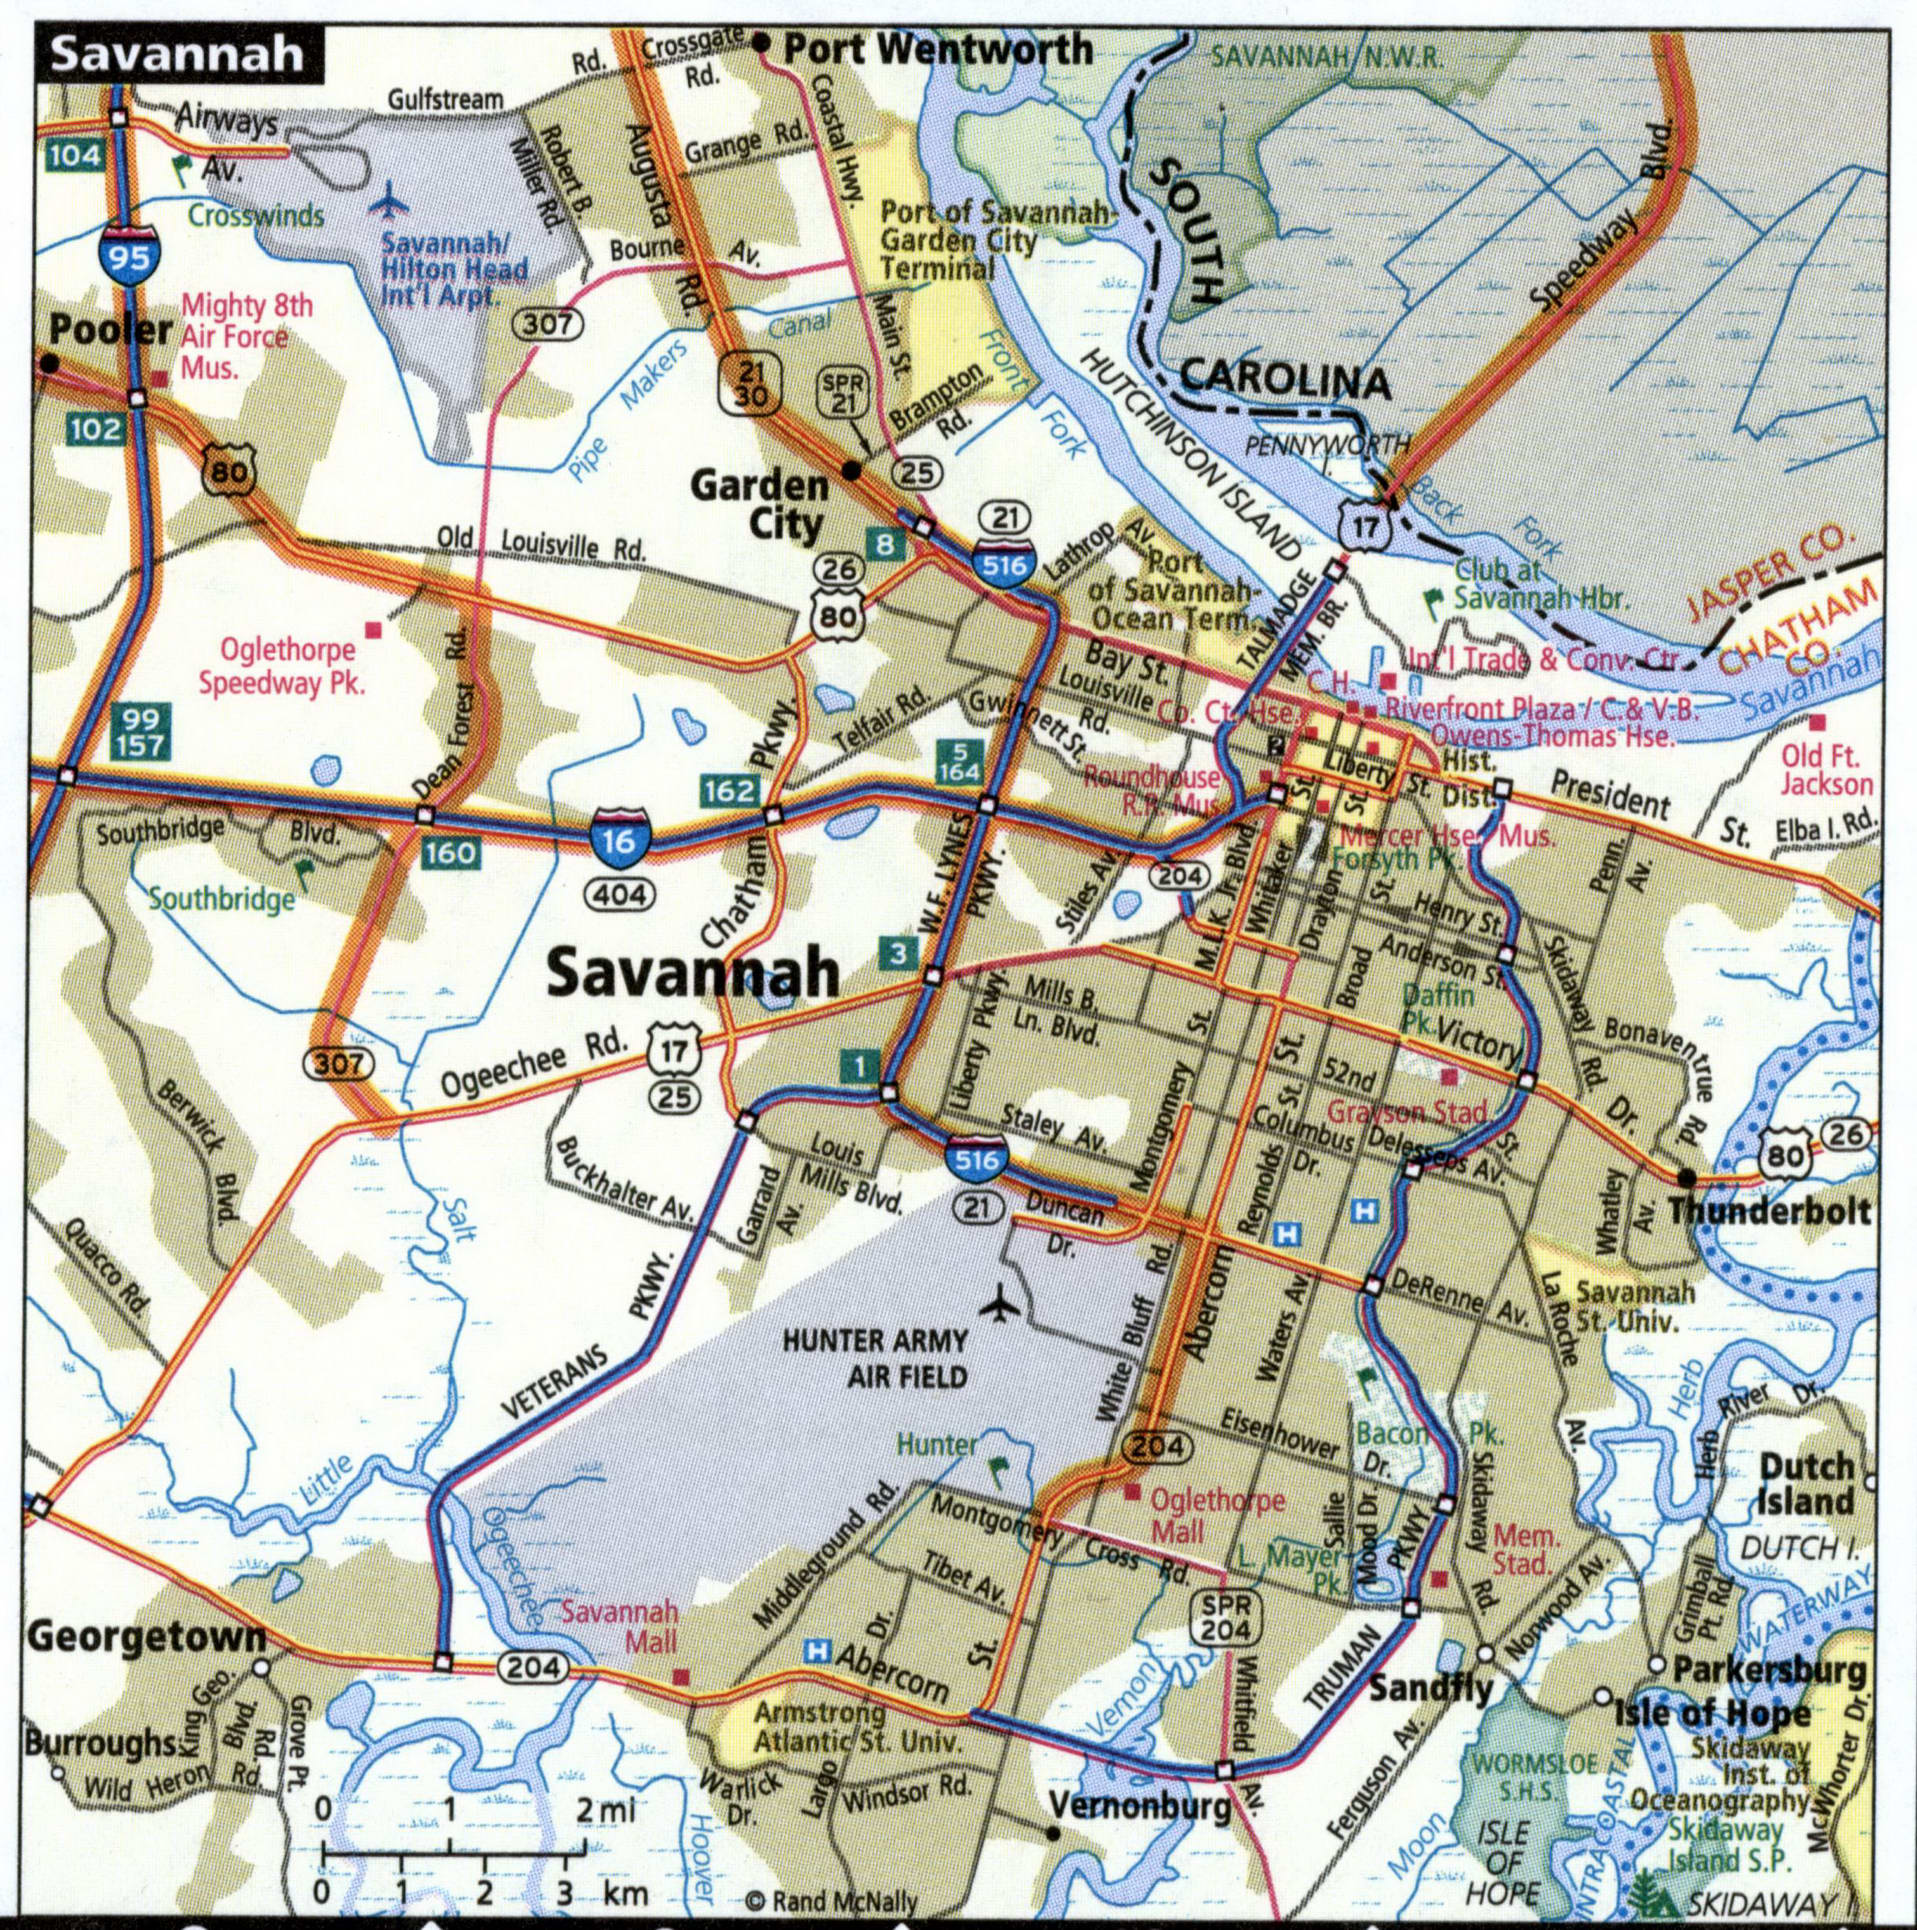 Savannah city map for truckers